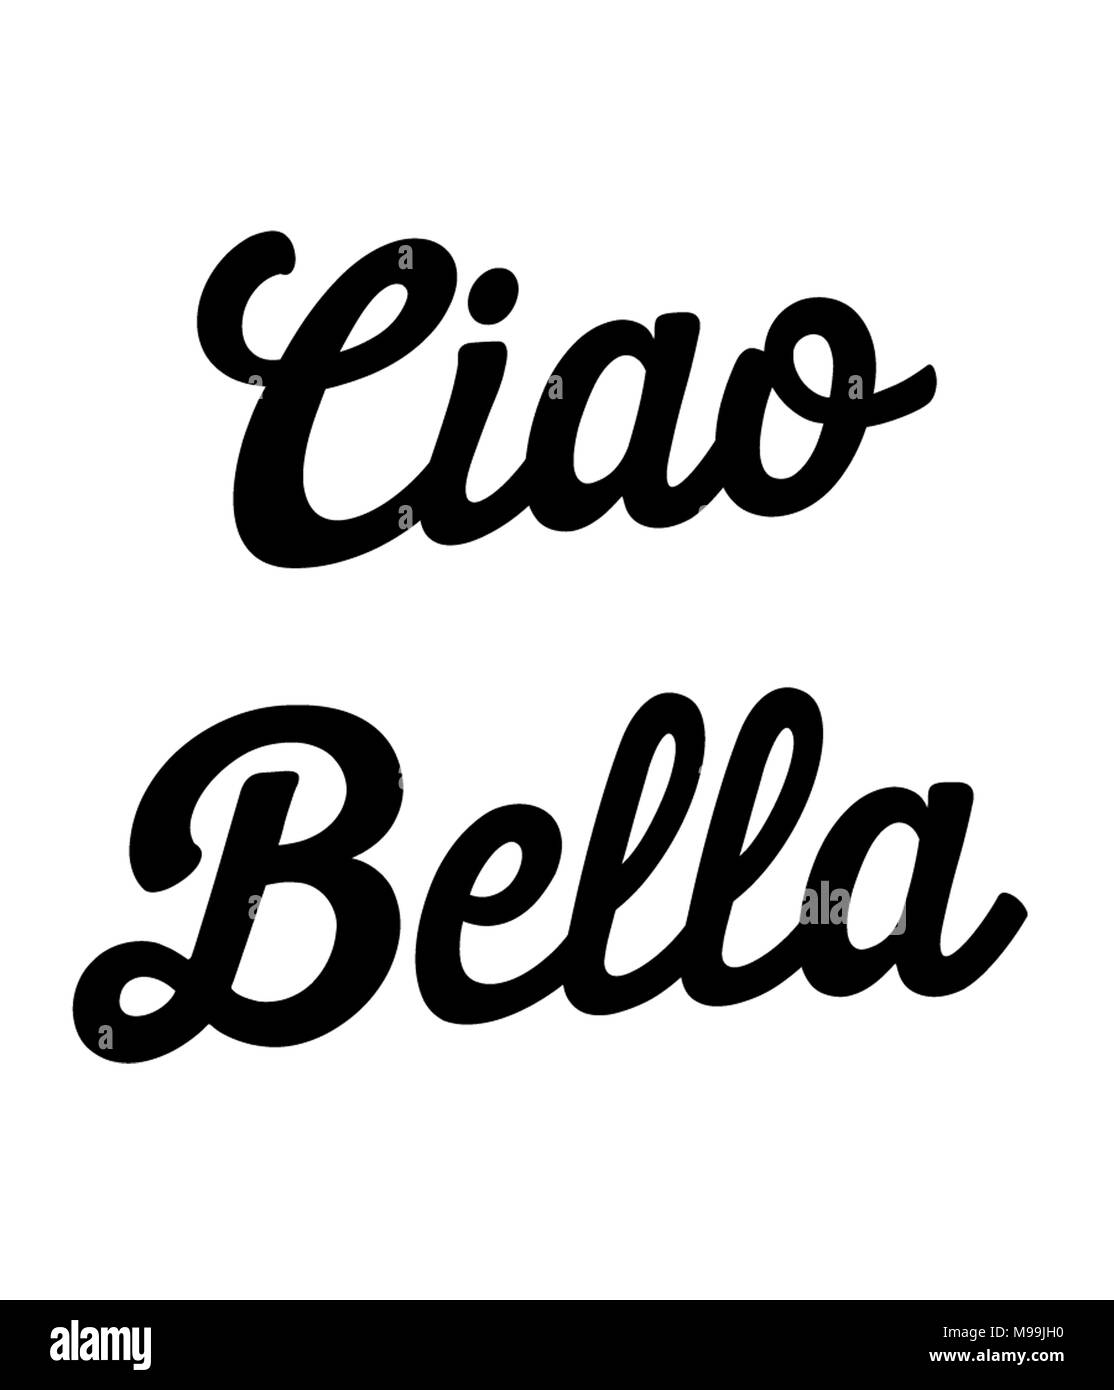 Bella ciao Cut Out Stock Images & Pictures - Alamy